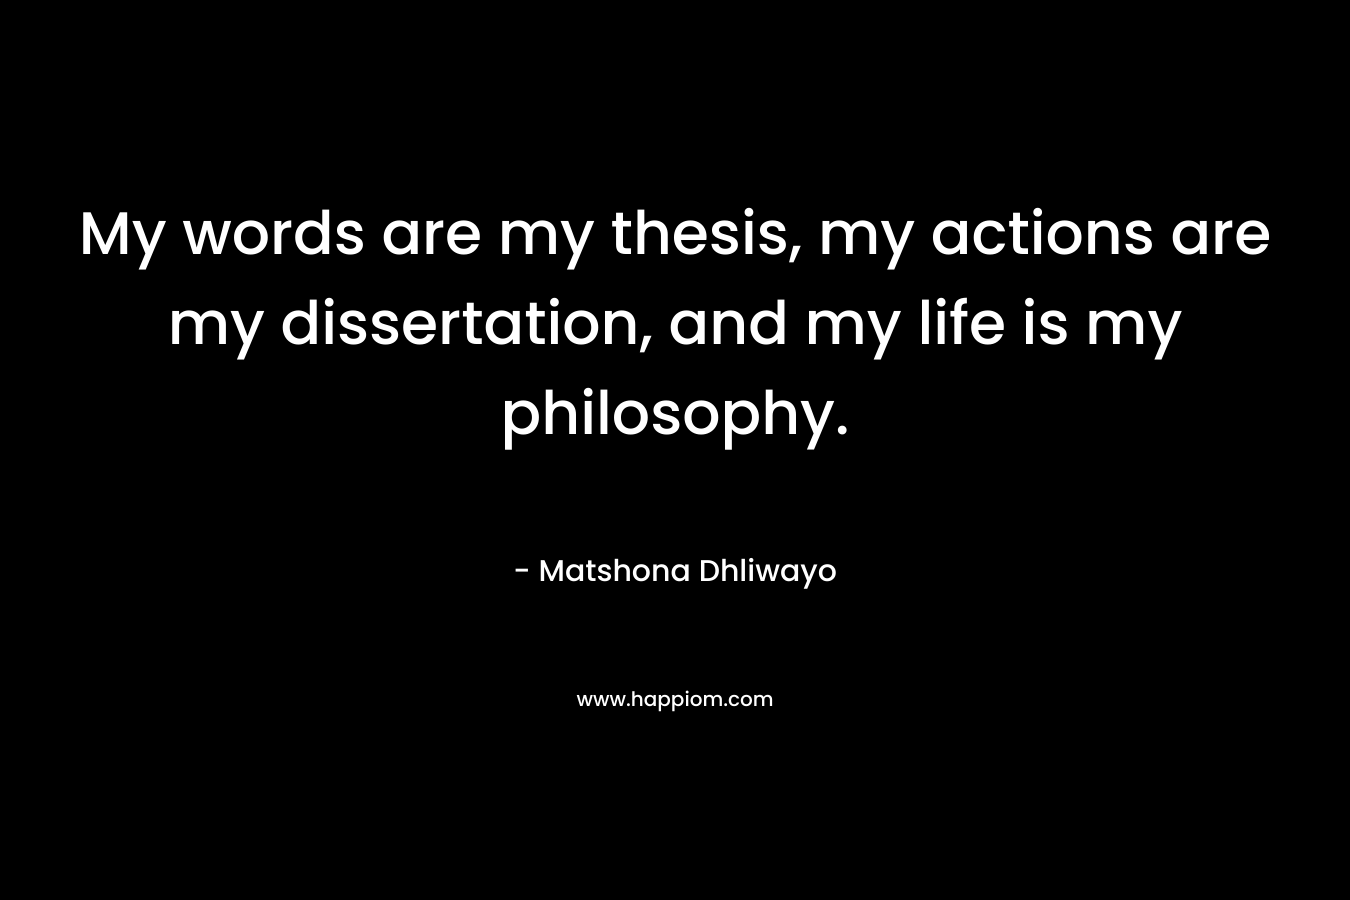 My words are my thesis, my actions are my dissertation, and my life is my philosophy.